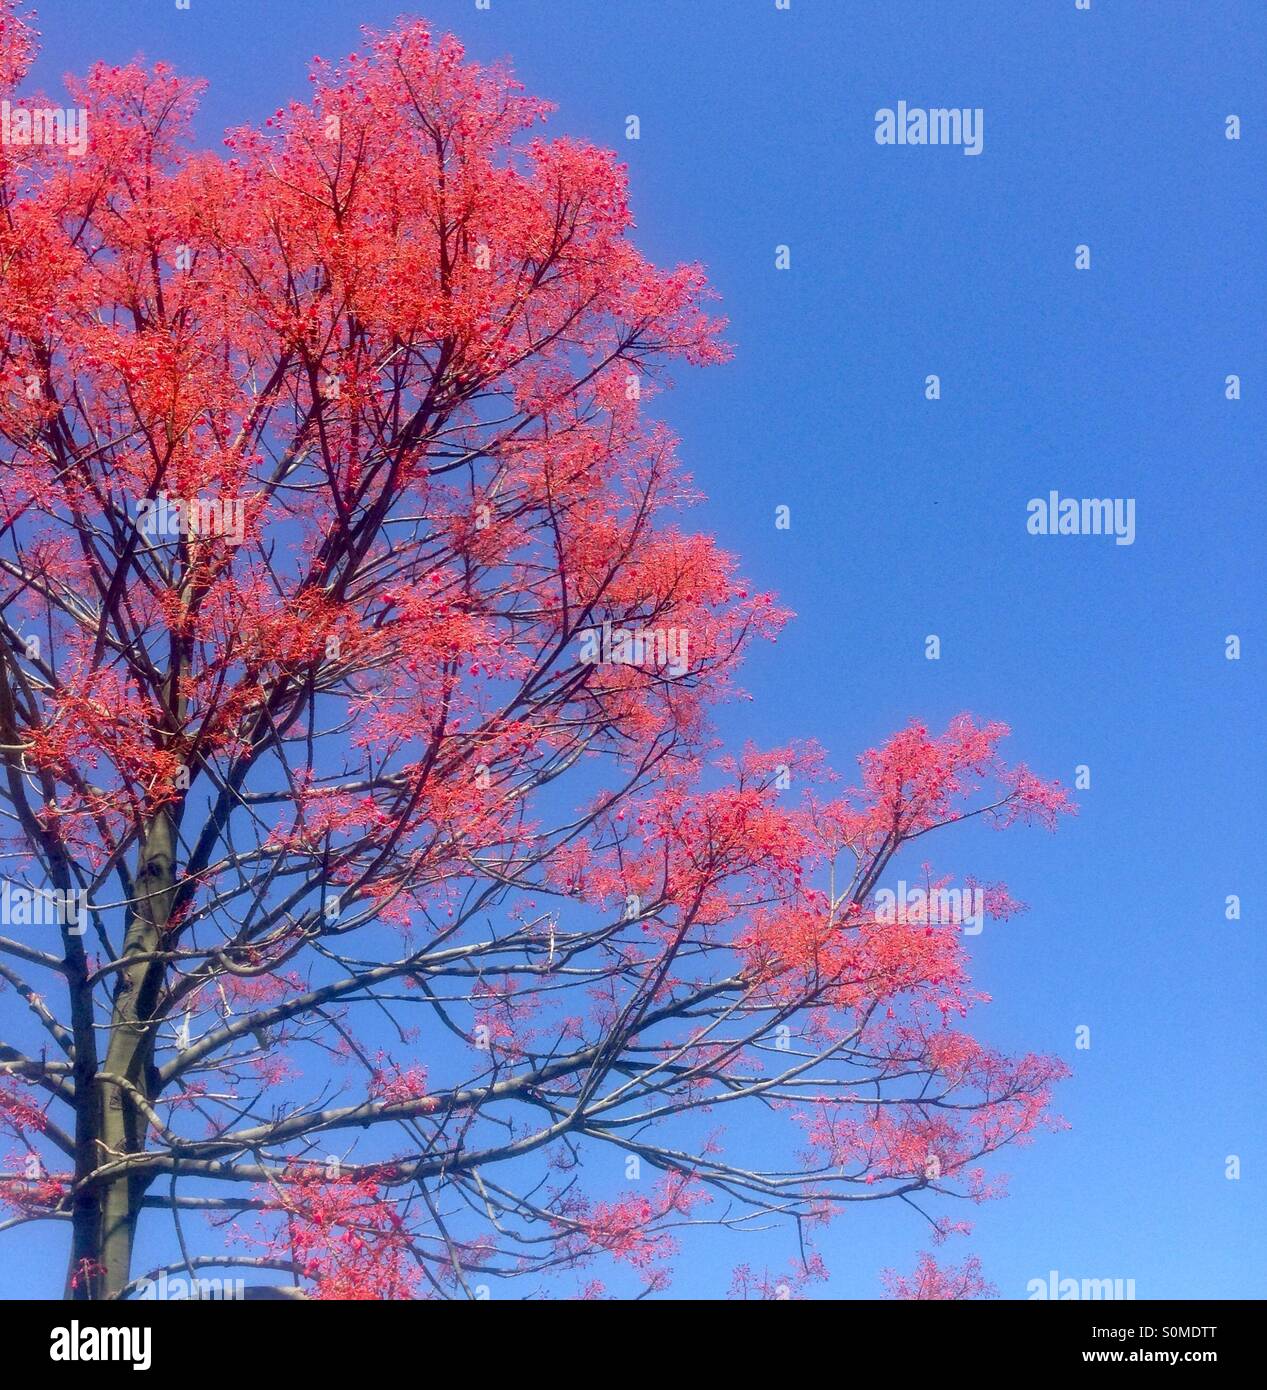 Red flame tree flowering with blue skies Stock Photo